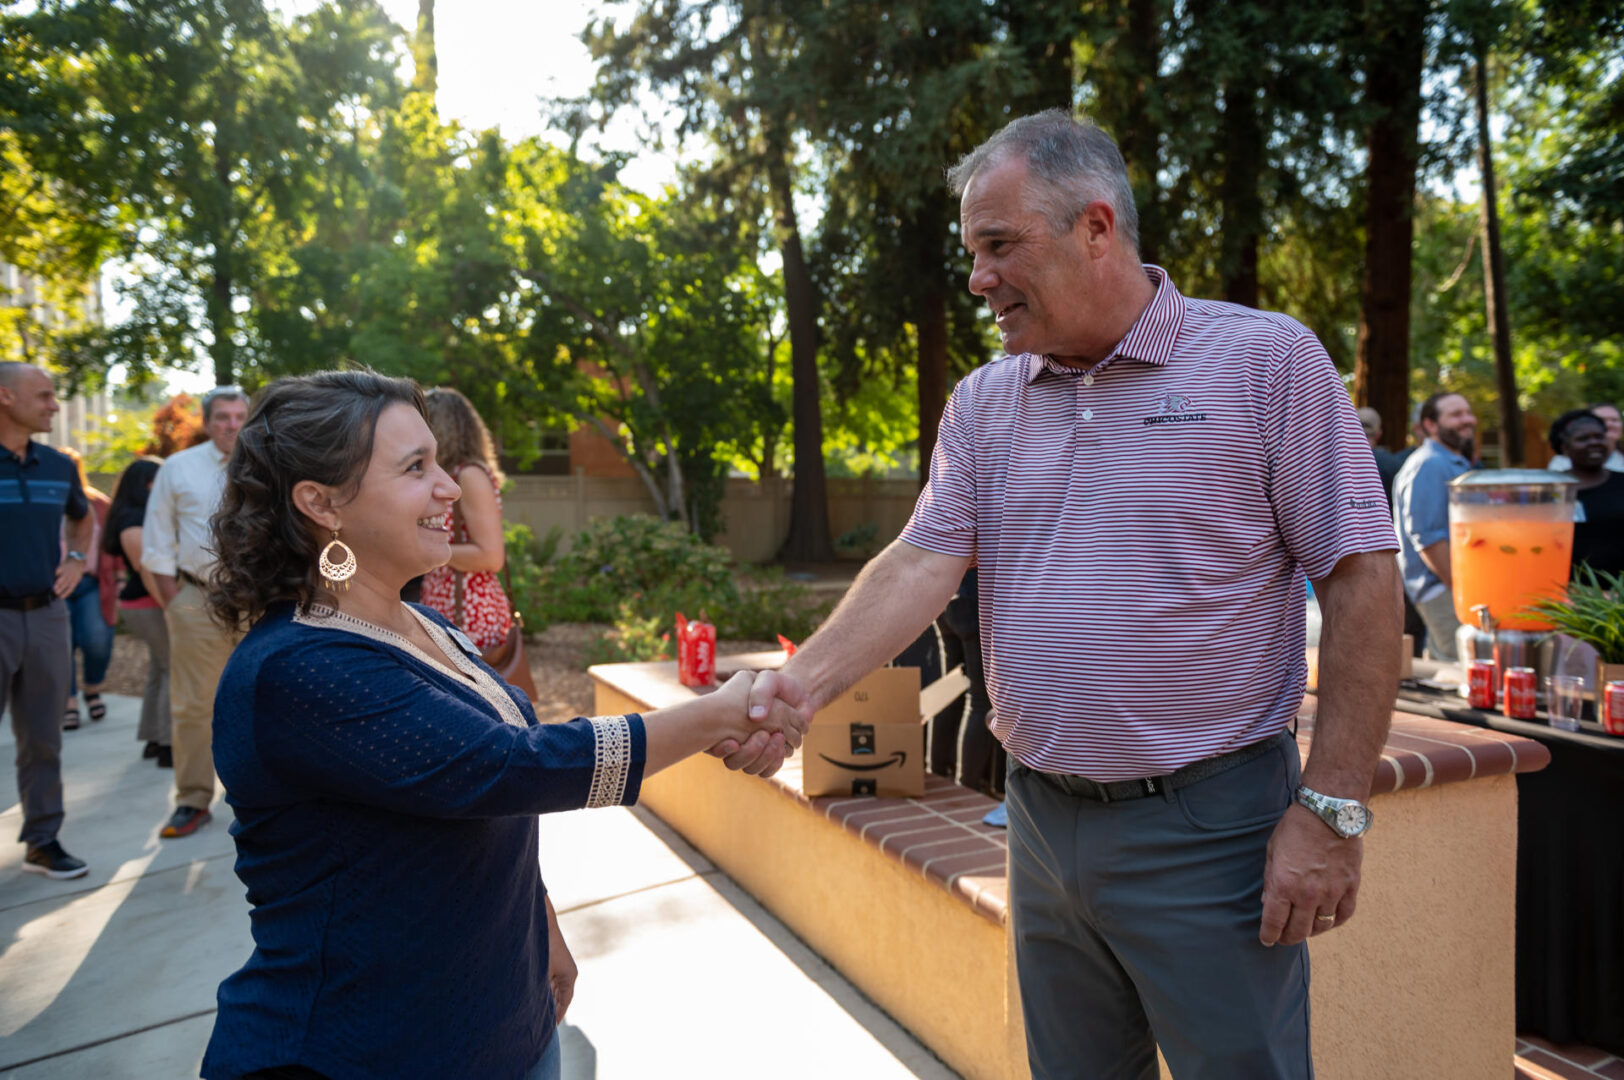 Tiffany Drobny shakes the hand of Steve Perez (right) during a fall President open house event.